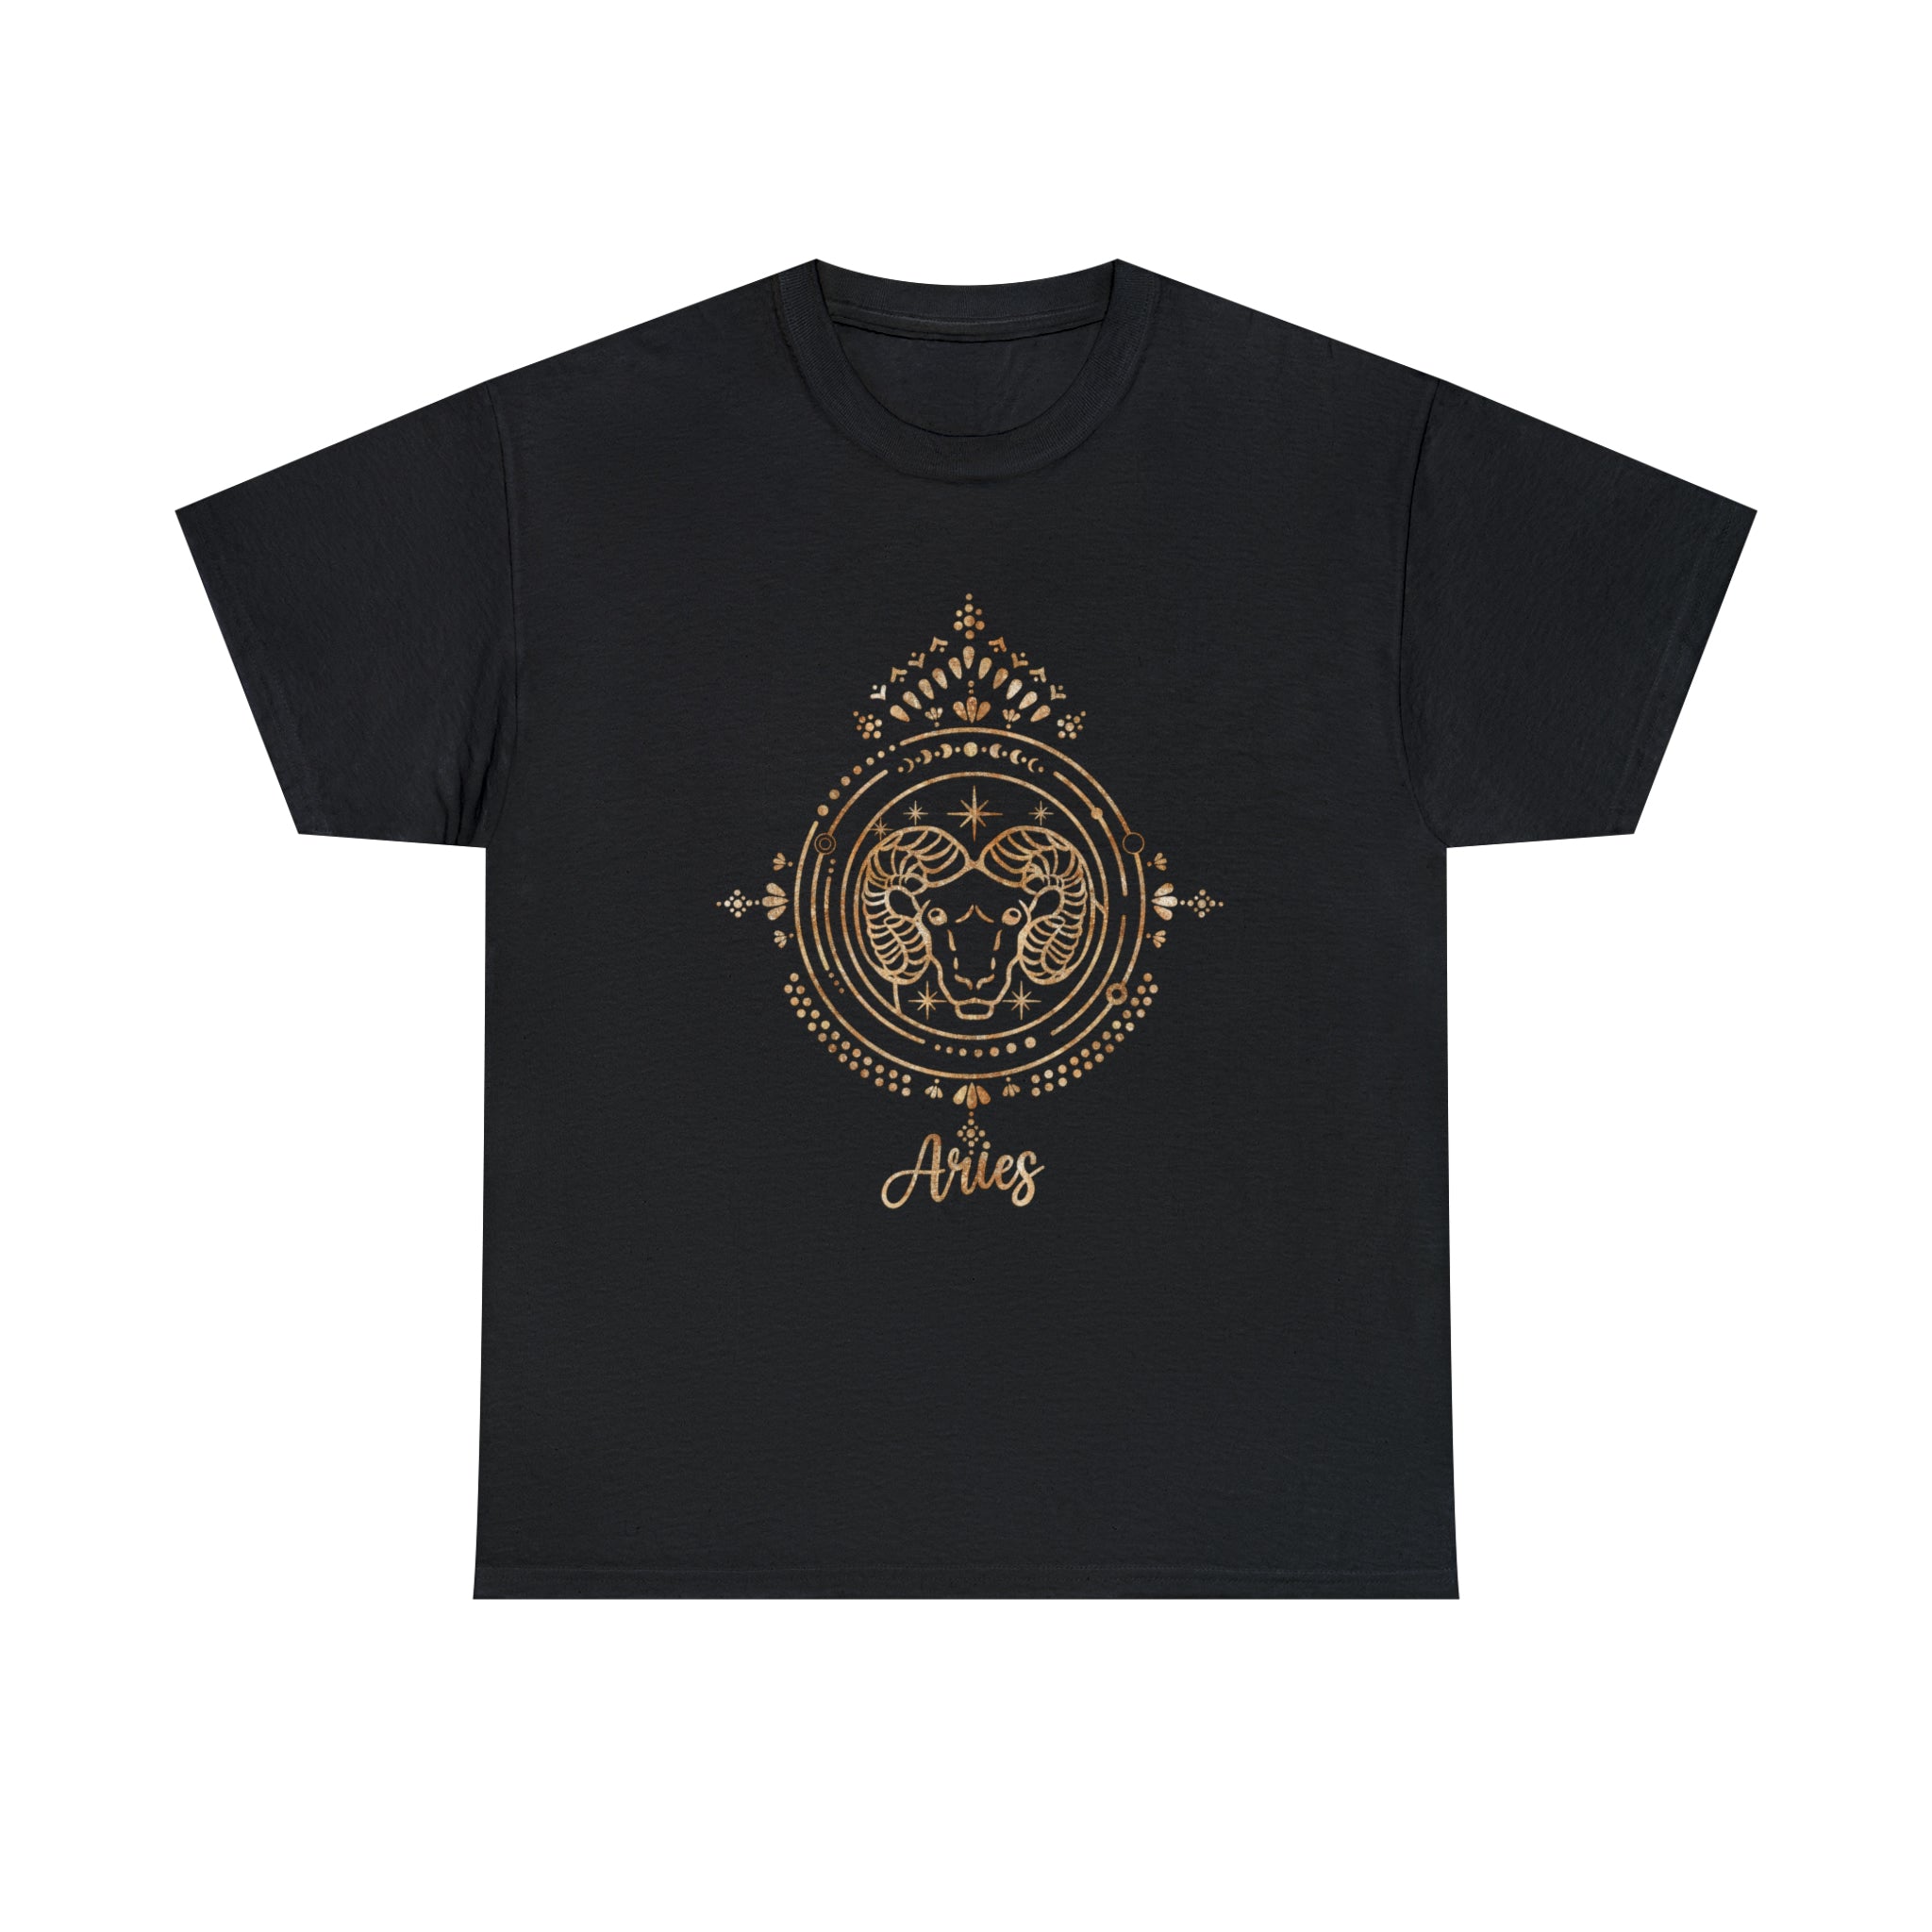 An ambitious Aries T-Shirt with a passionate gold emblem on it.